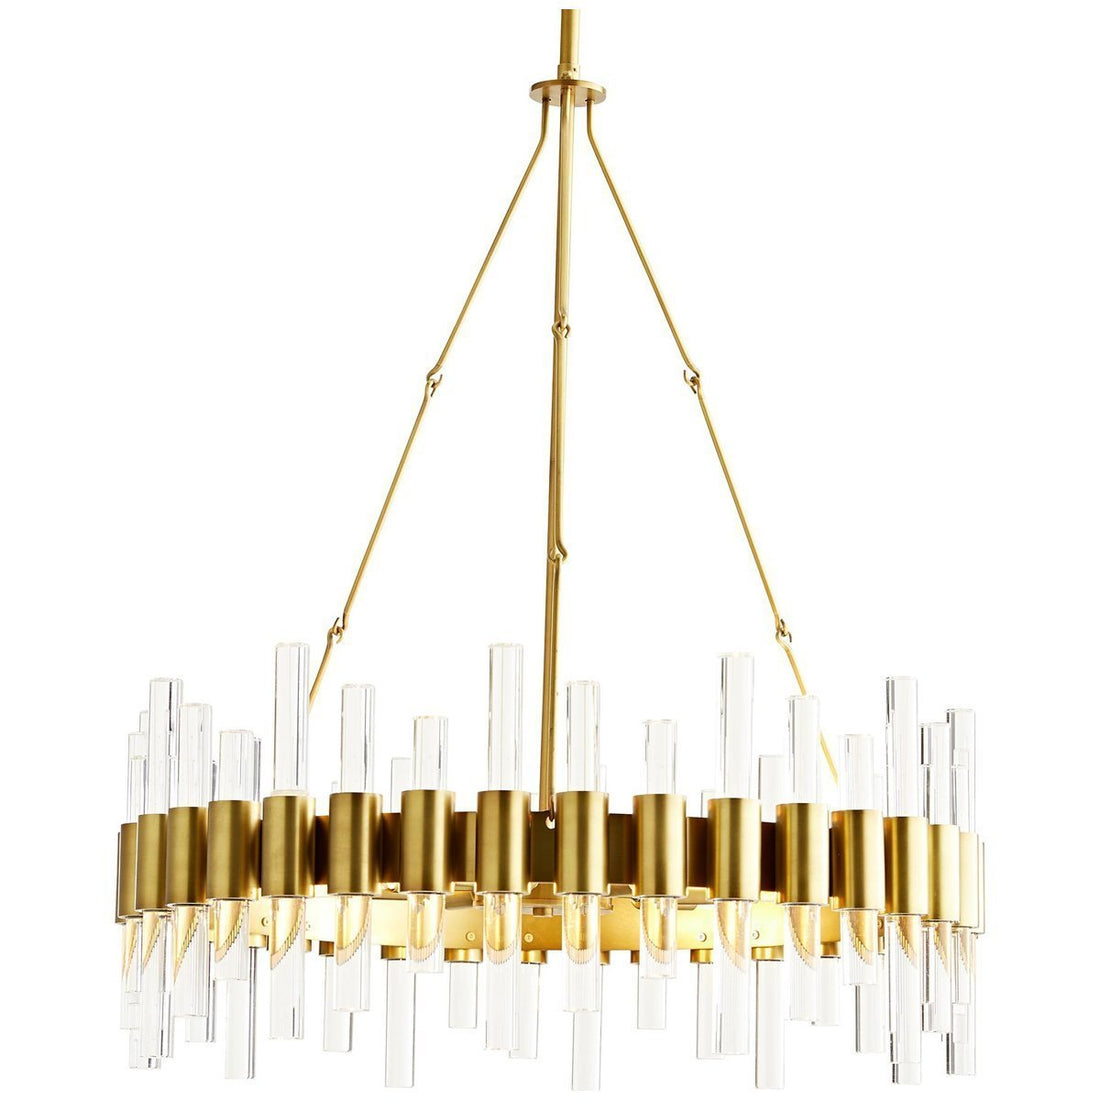 Arteriors Haskell Small Chandelier